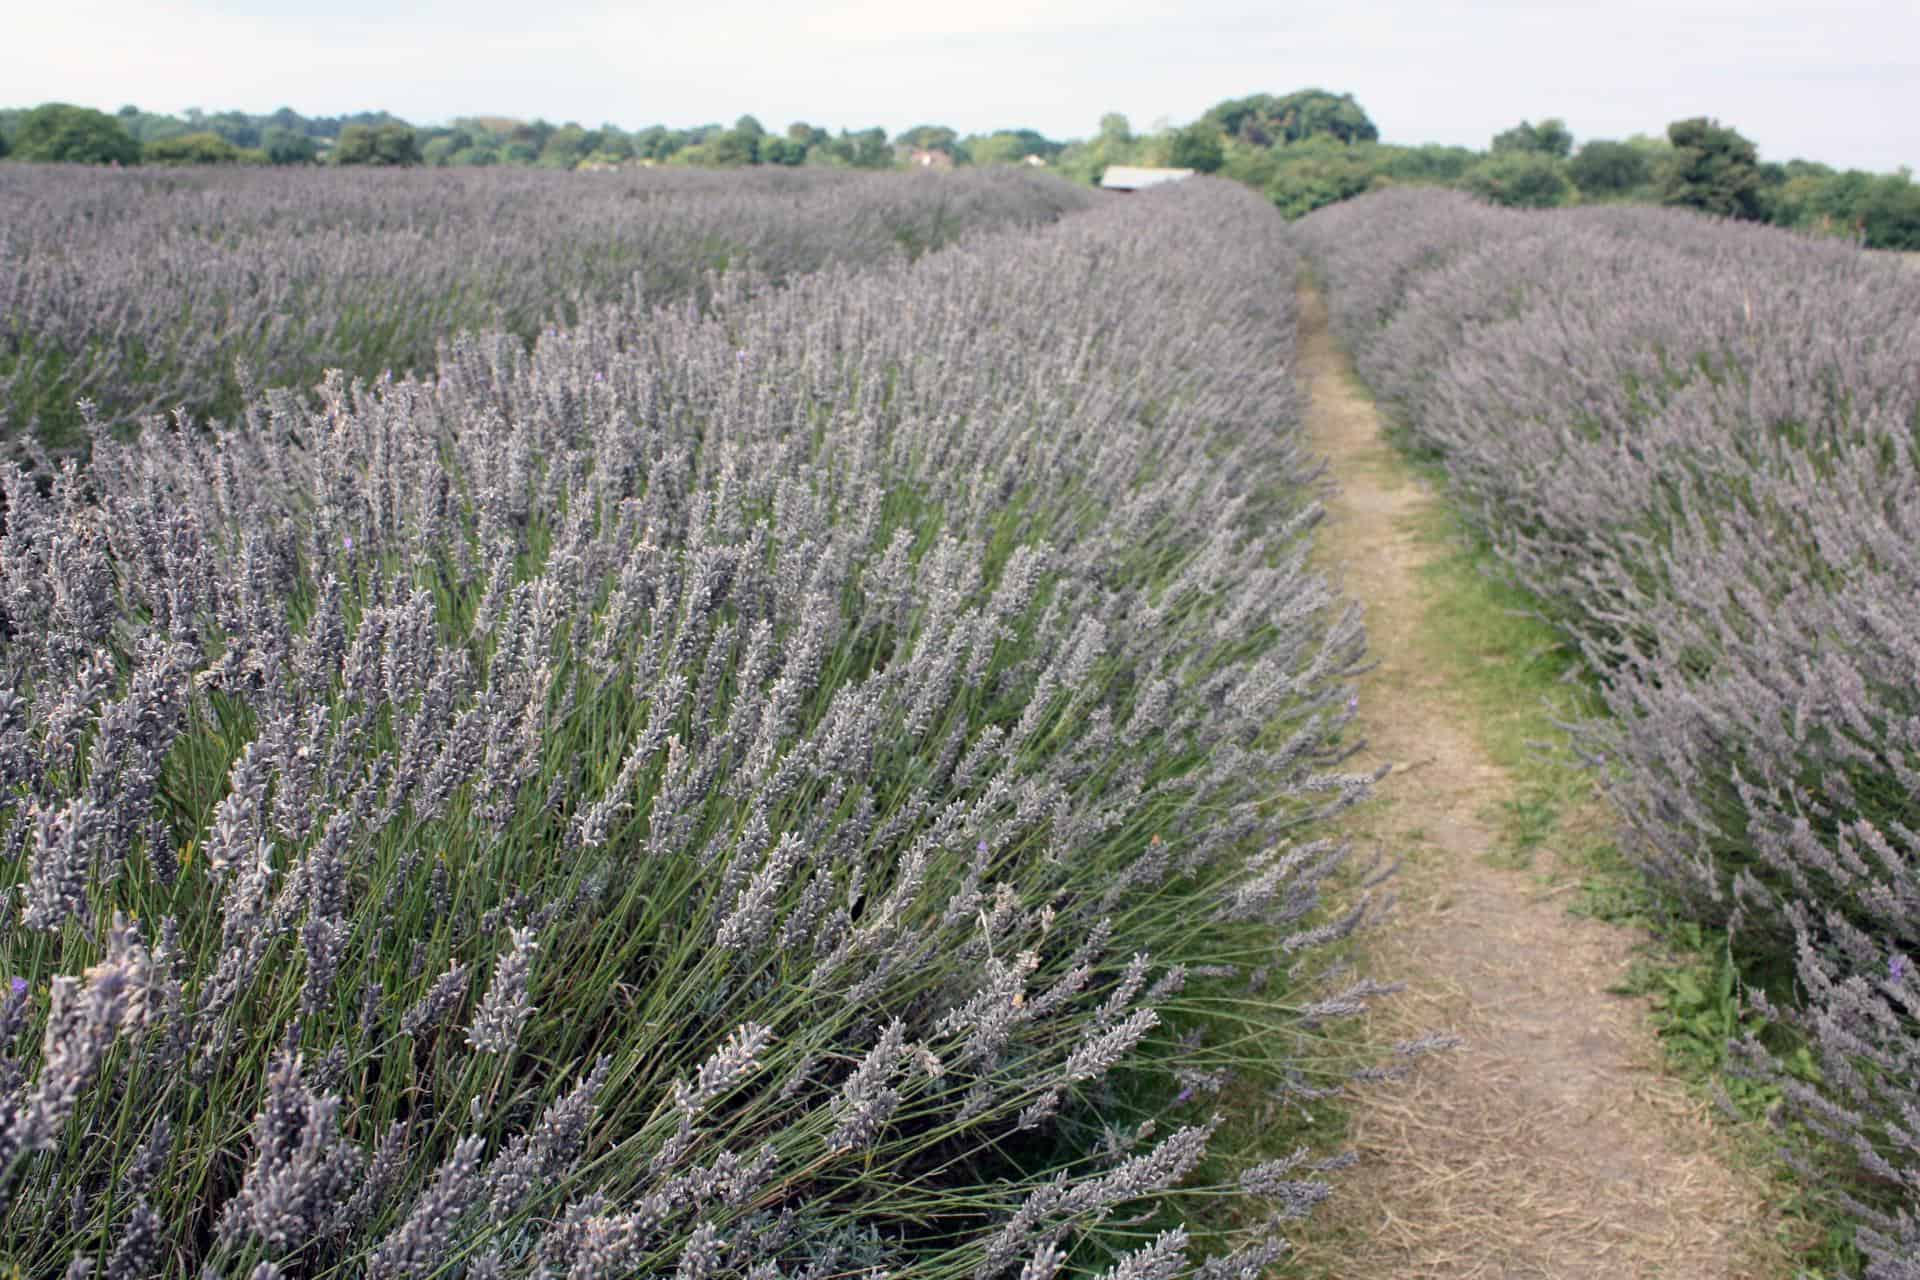 London's lesser known sights: Mayfield Lavender Farms